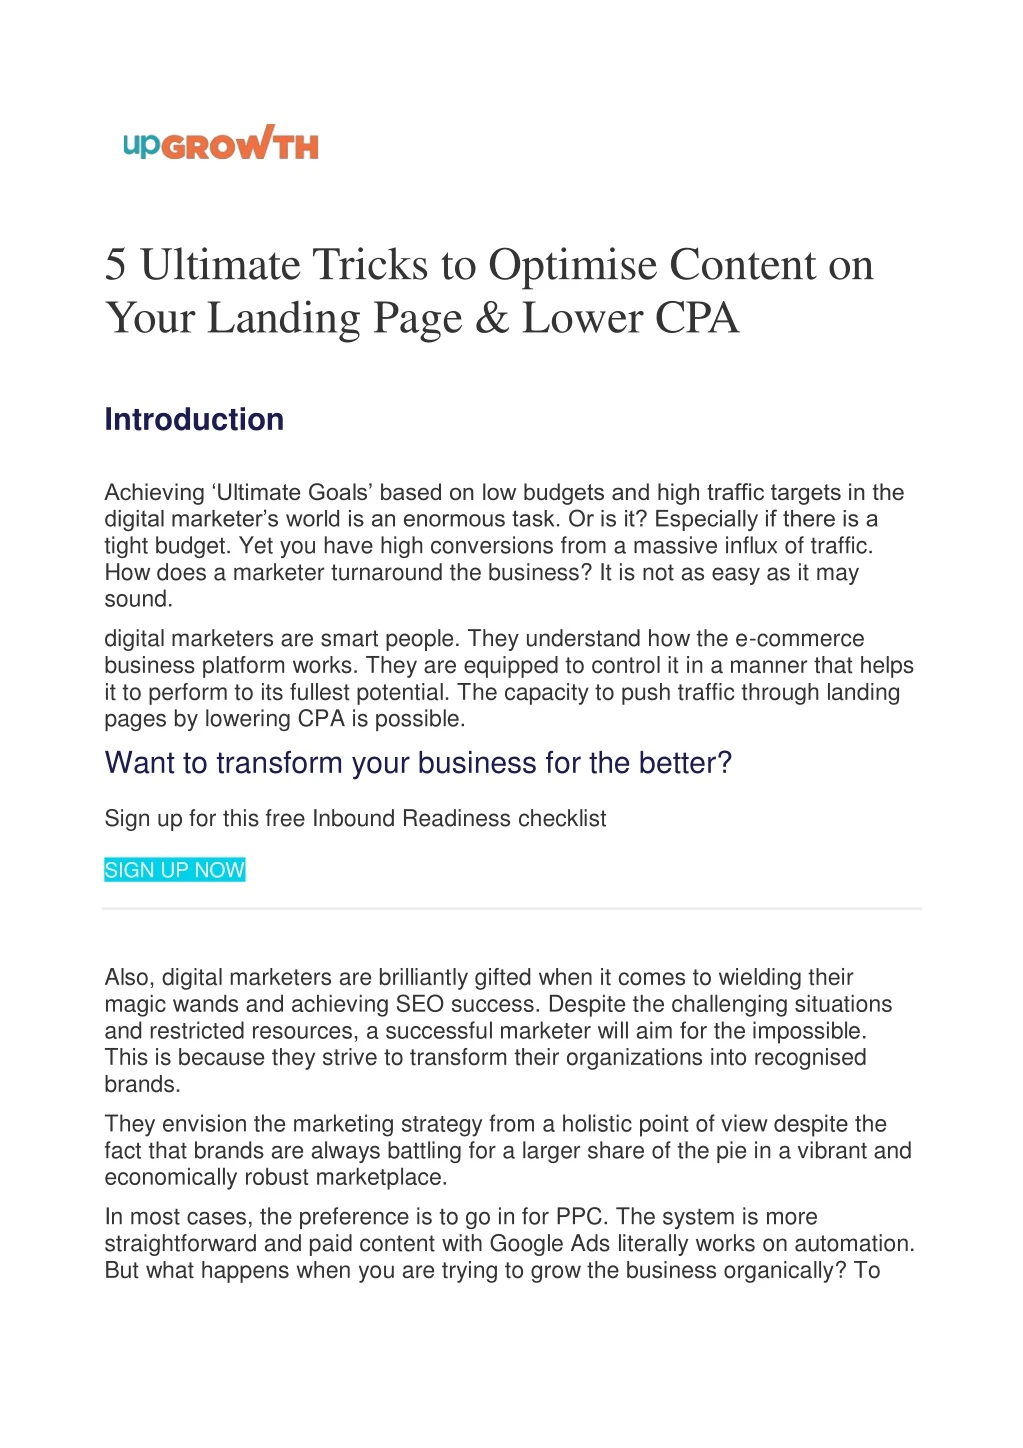 5 ultimate tricks to optimise content on your